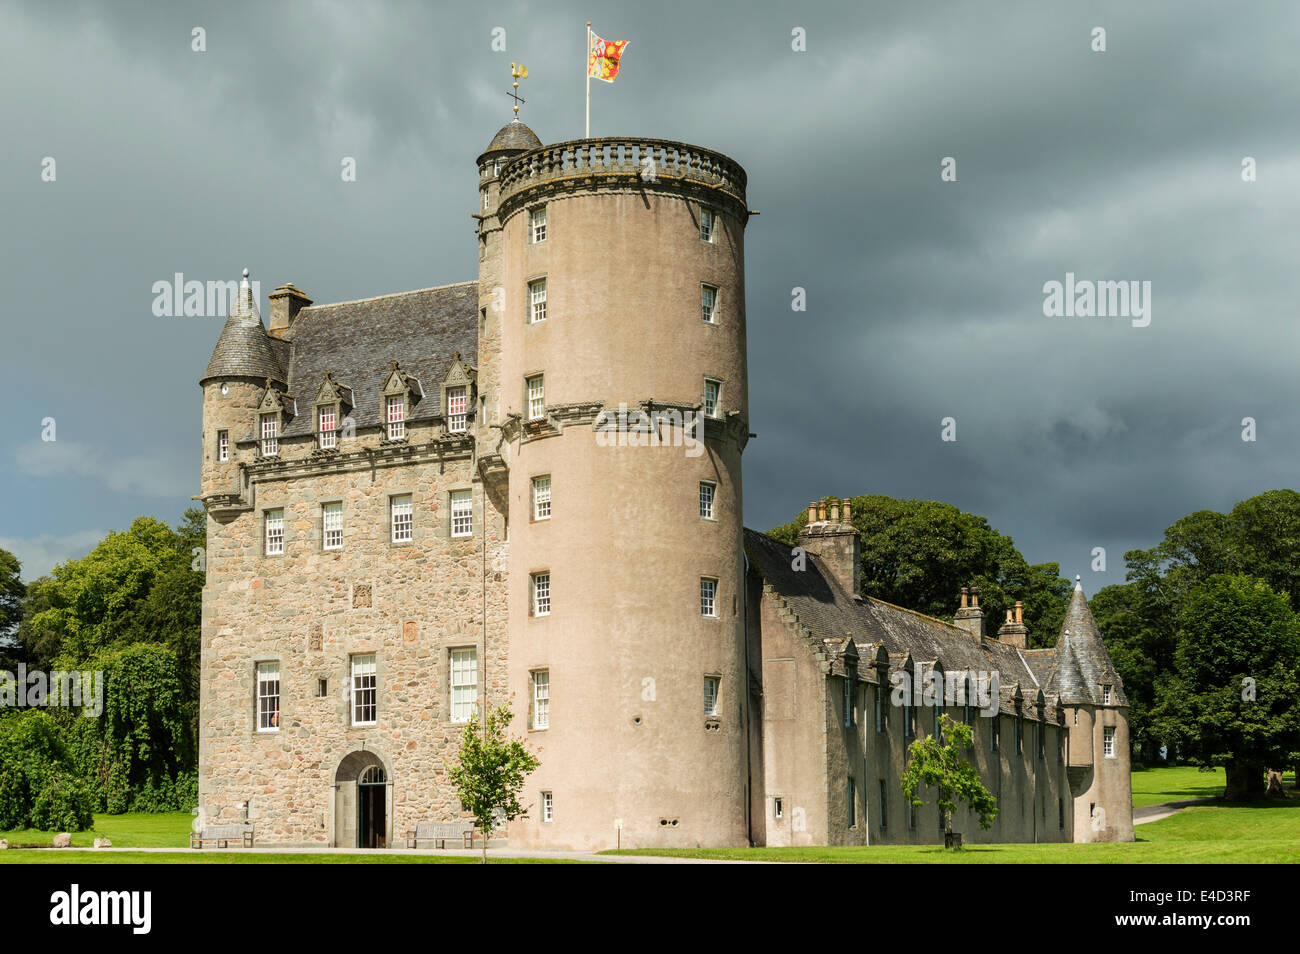 CASTLE FRASER UNDER A STORMY SKY IN SUMMER KEMNAY  ABERDEENSHIRE SCOTLAND Stock Photo